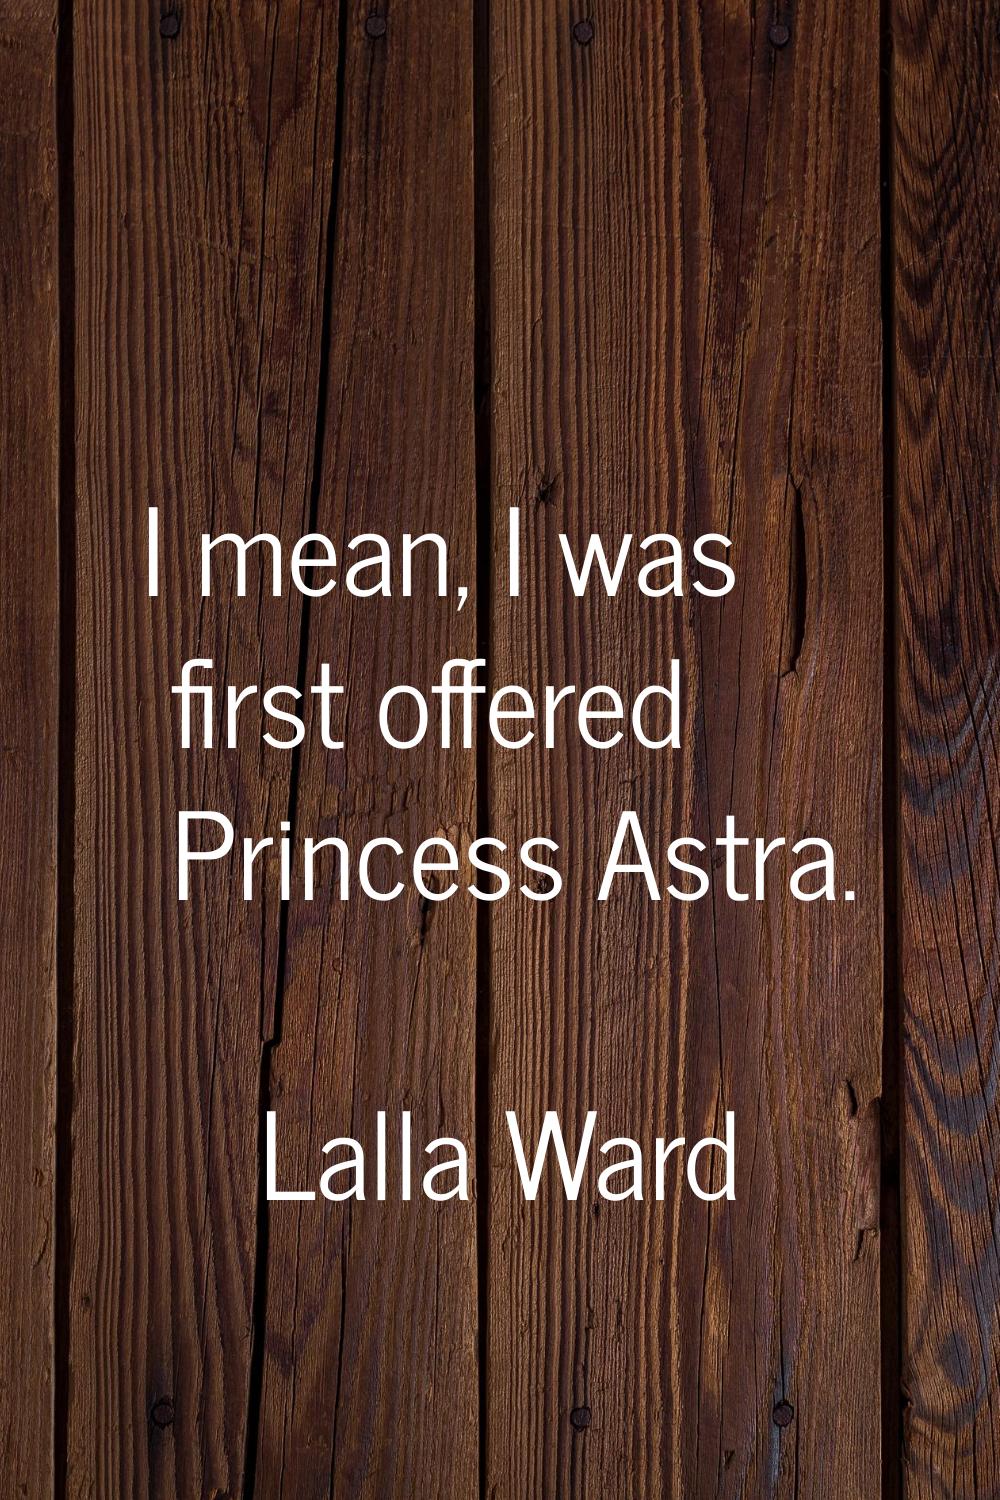 I mean, I was first offered Princess Astra.